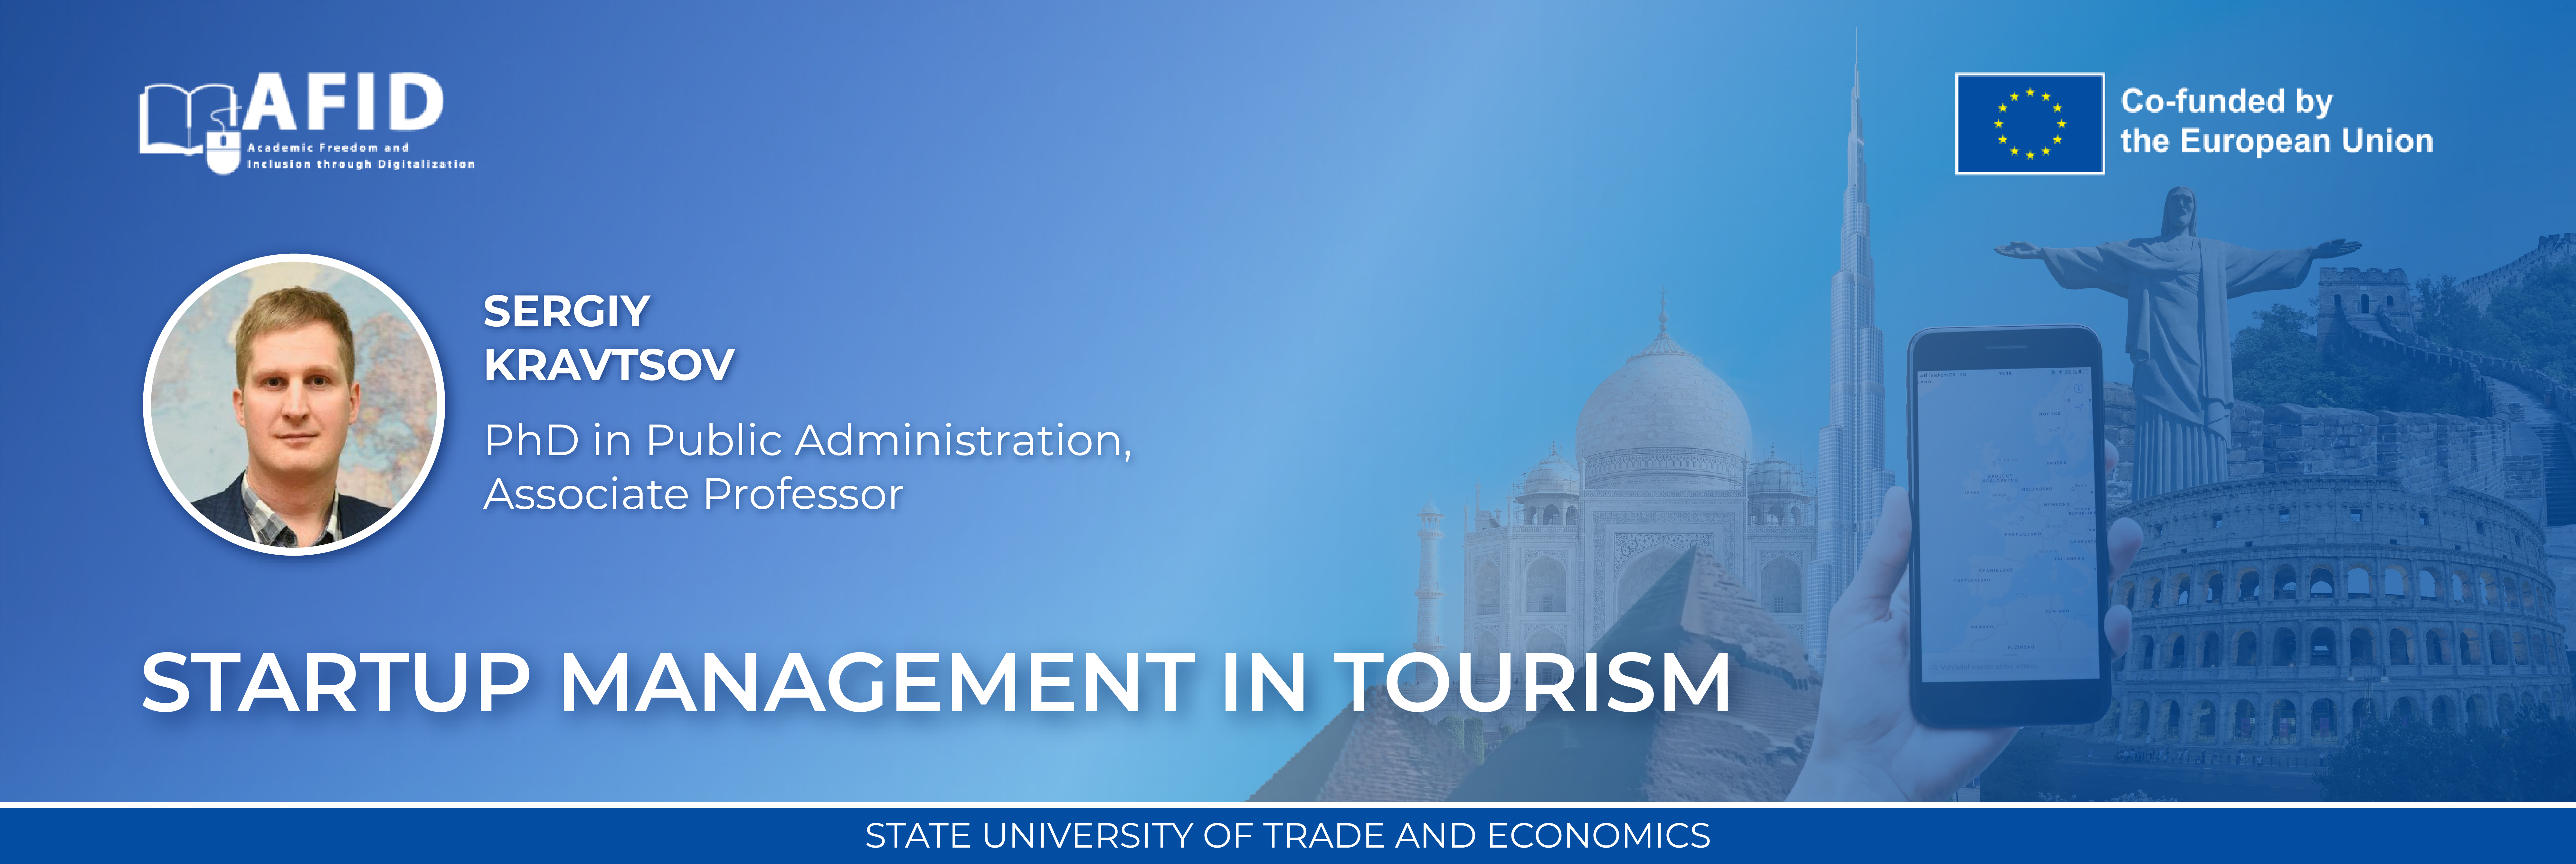 STARTUP MANAGEMENT IN TOURISM